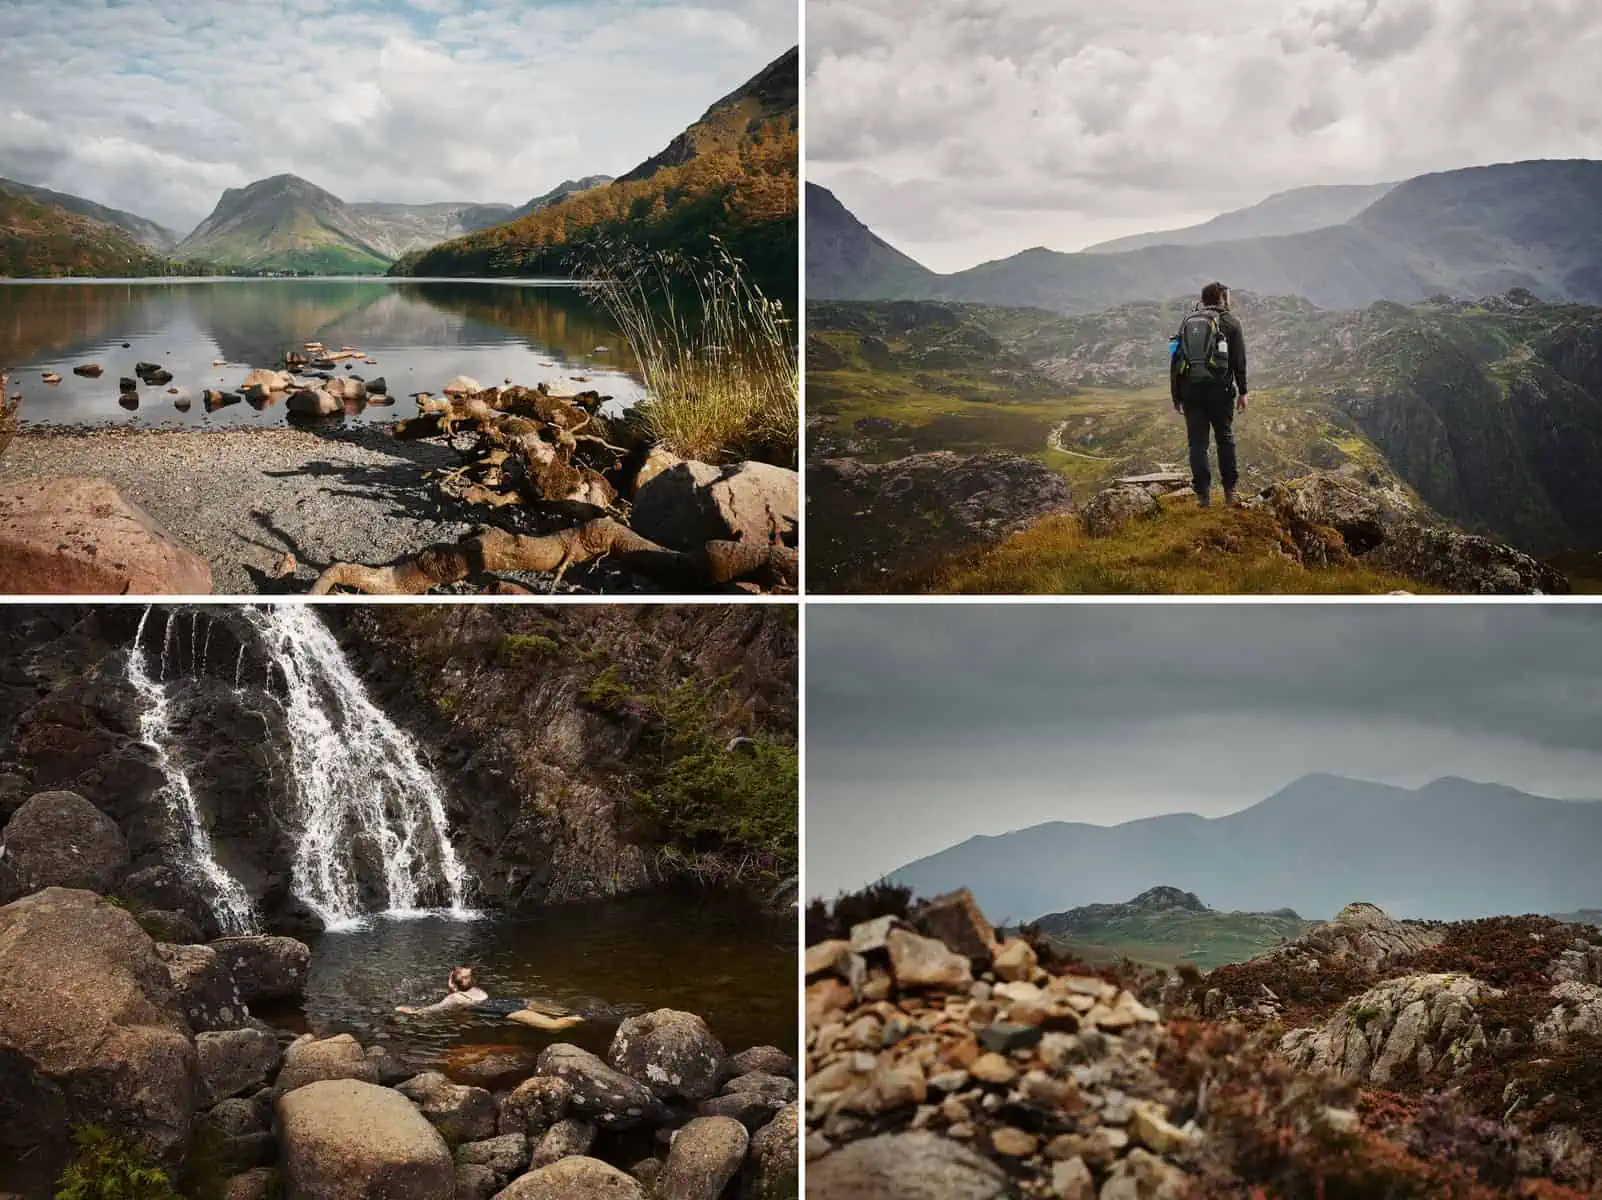 ID: Clockwise from left 1: A landscape image of a lake. In the foreground are rocks and stones. In the middle is the water from the lake with a mirror reflection of the lake. The sky is slightly overcast with bright blue behind. It is a fair weather day and the light is golden. 2: A landscape image. Matt stands on a rock outcrop looking at a mountain view in front of him. The air is hazy and so this is impacting the focus of the mountains. He looks out to the right and is pictured from behind. He wears grey trousers, grey hoody and grey and green backpack. 3: A landscape image. In the foreground is a rocky shaped mountain side with lots of grass and green and greys from the rocks. In the background are hazy jutting peaks. It is overcast but there is a highlighted quality to the image. 4: A landscape image. Fay is pictured swimming in a wild swimming spot at the base of a waterfall. The water from above is white and fast flowing. Around the pool are lots of big rocks. The image is quite brown and Fay is looking at the waterfall wearing a black swimsuit.